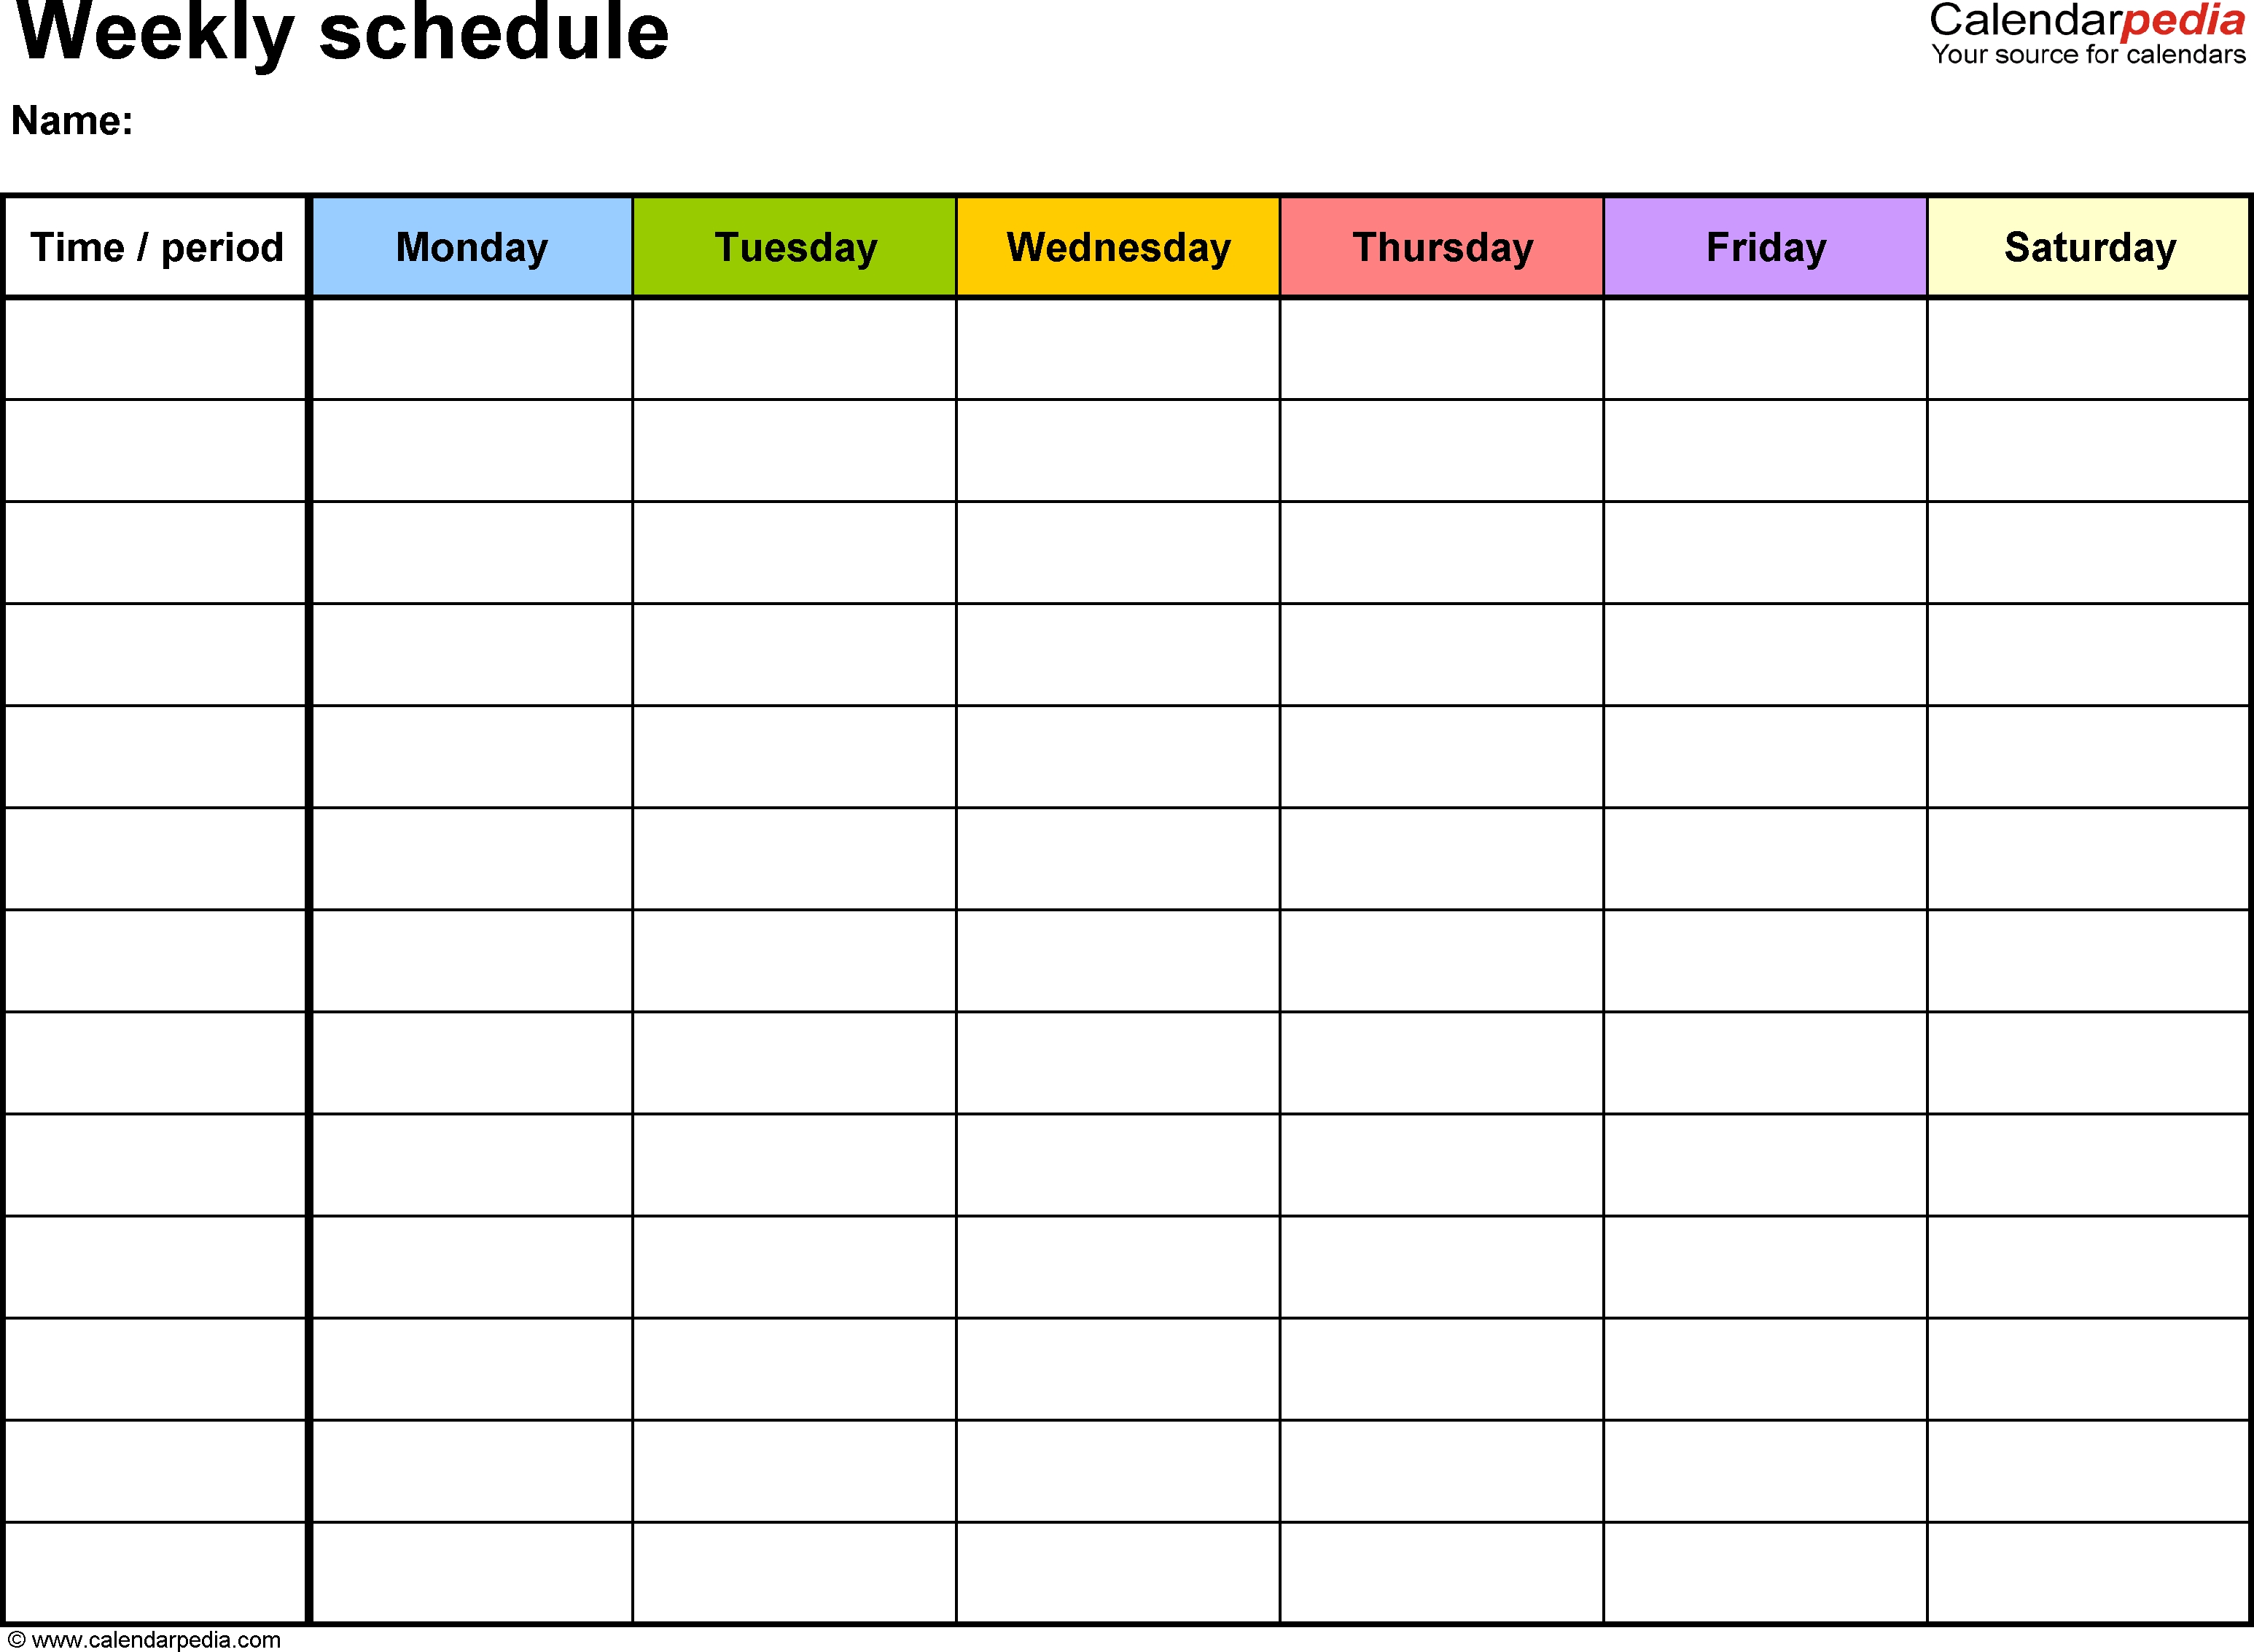 Free Weekly Schedule Templates For Word - 18 Templates-Monday Through Friday Planning Template